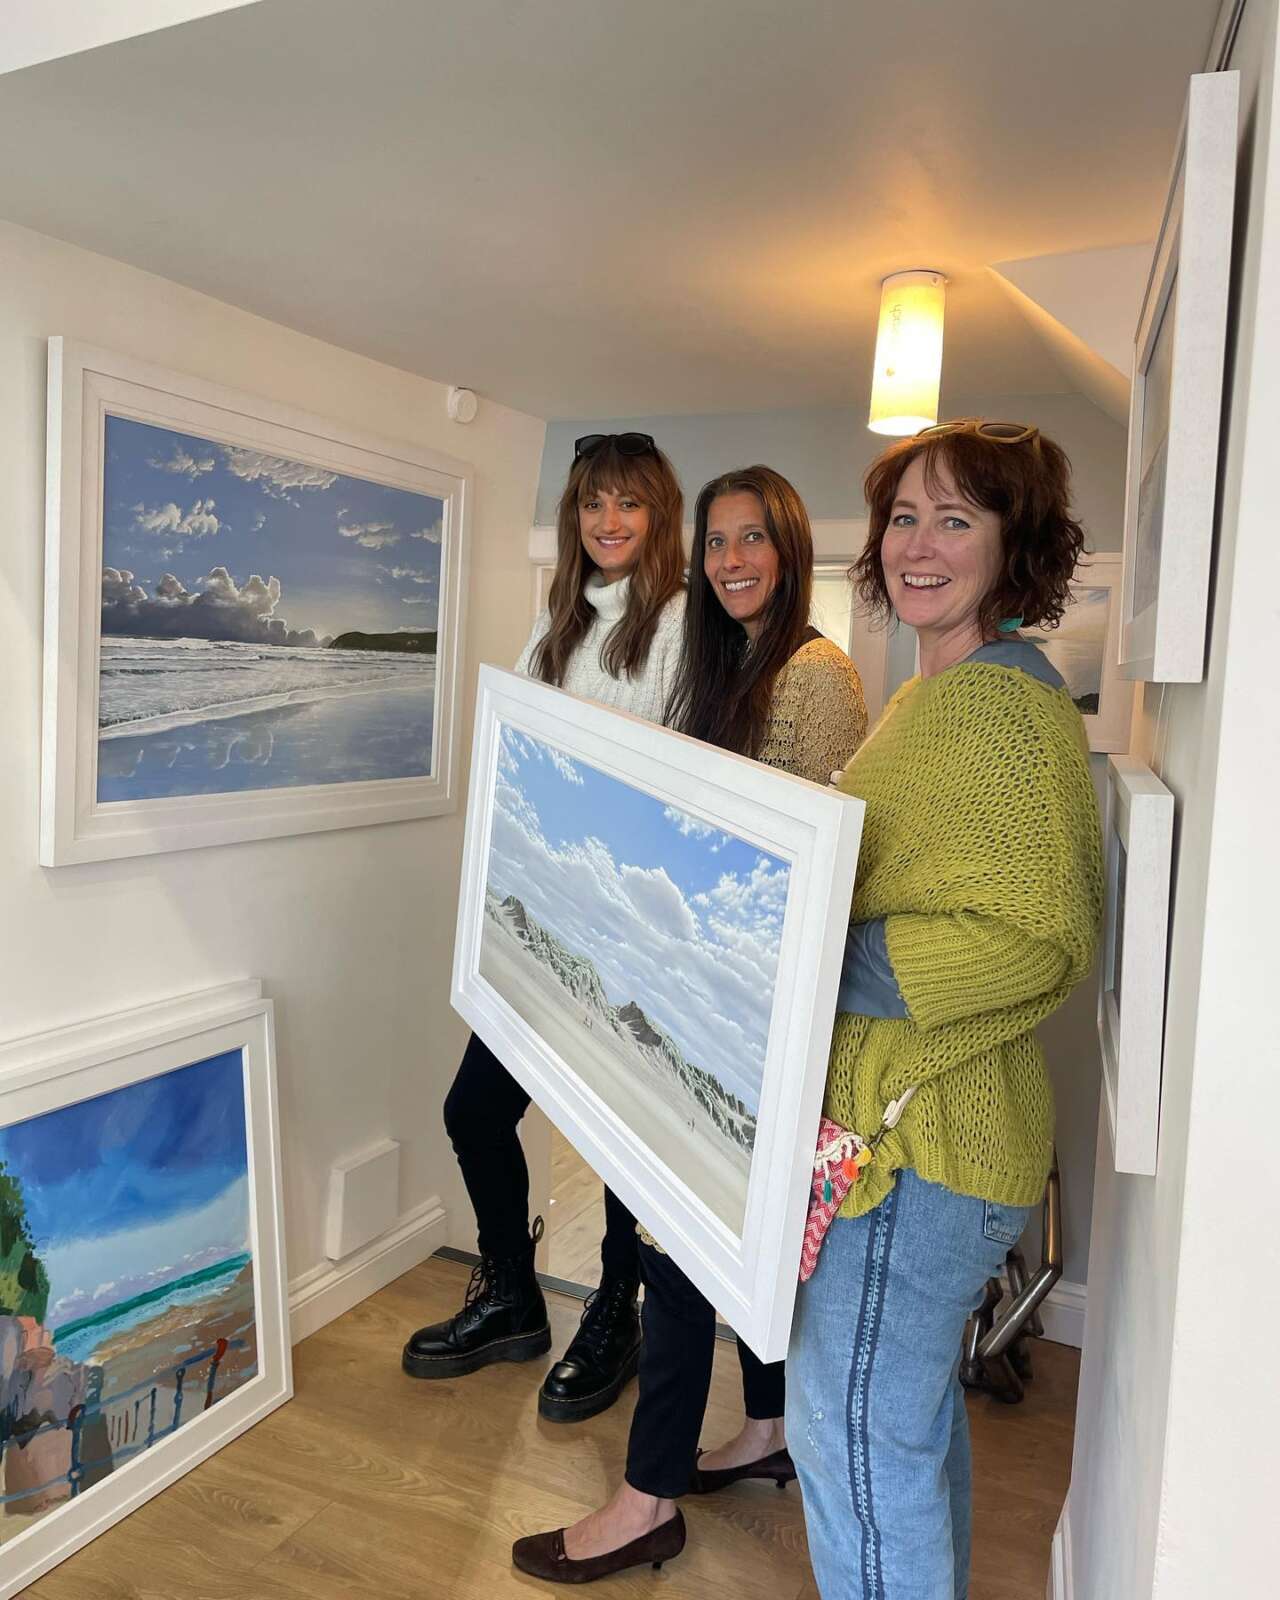 Josie Grant and Rachel Stanton at Two Rivers Framers